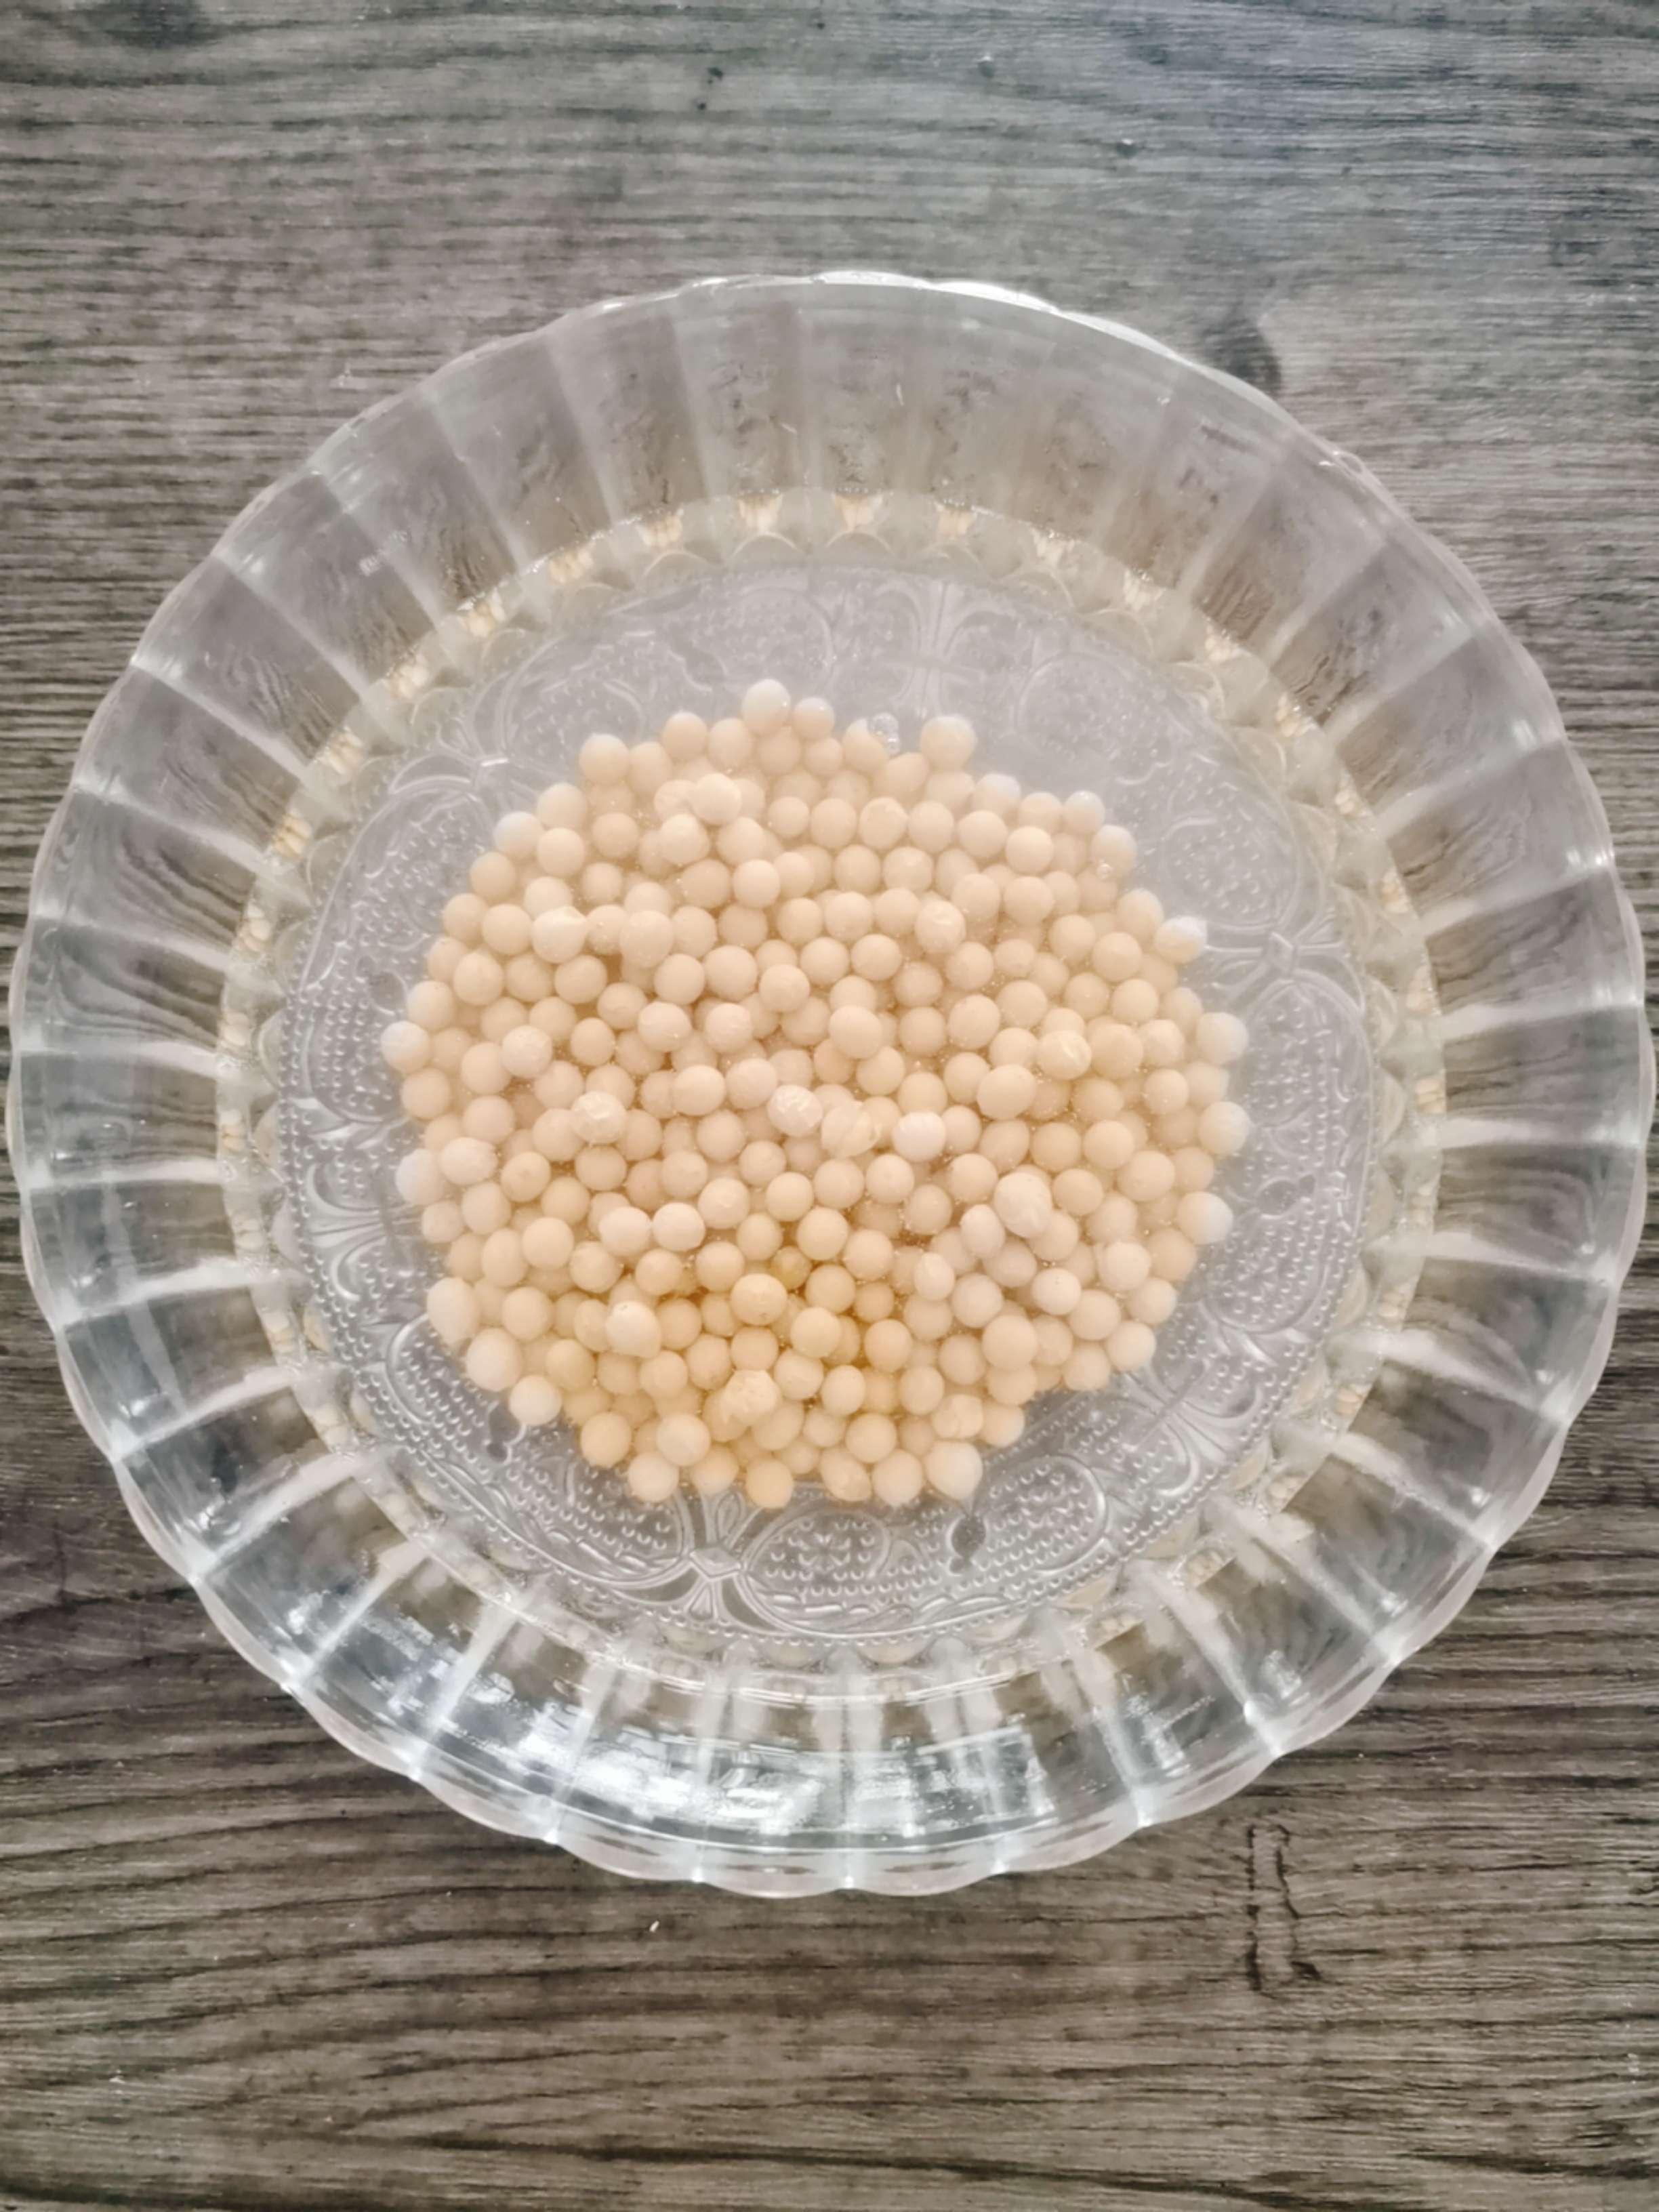 Curry Soybeans recipe